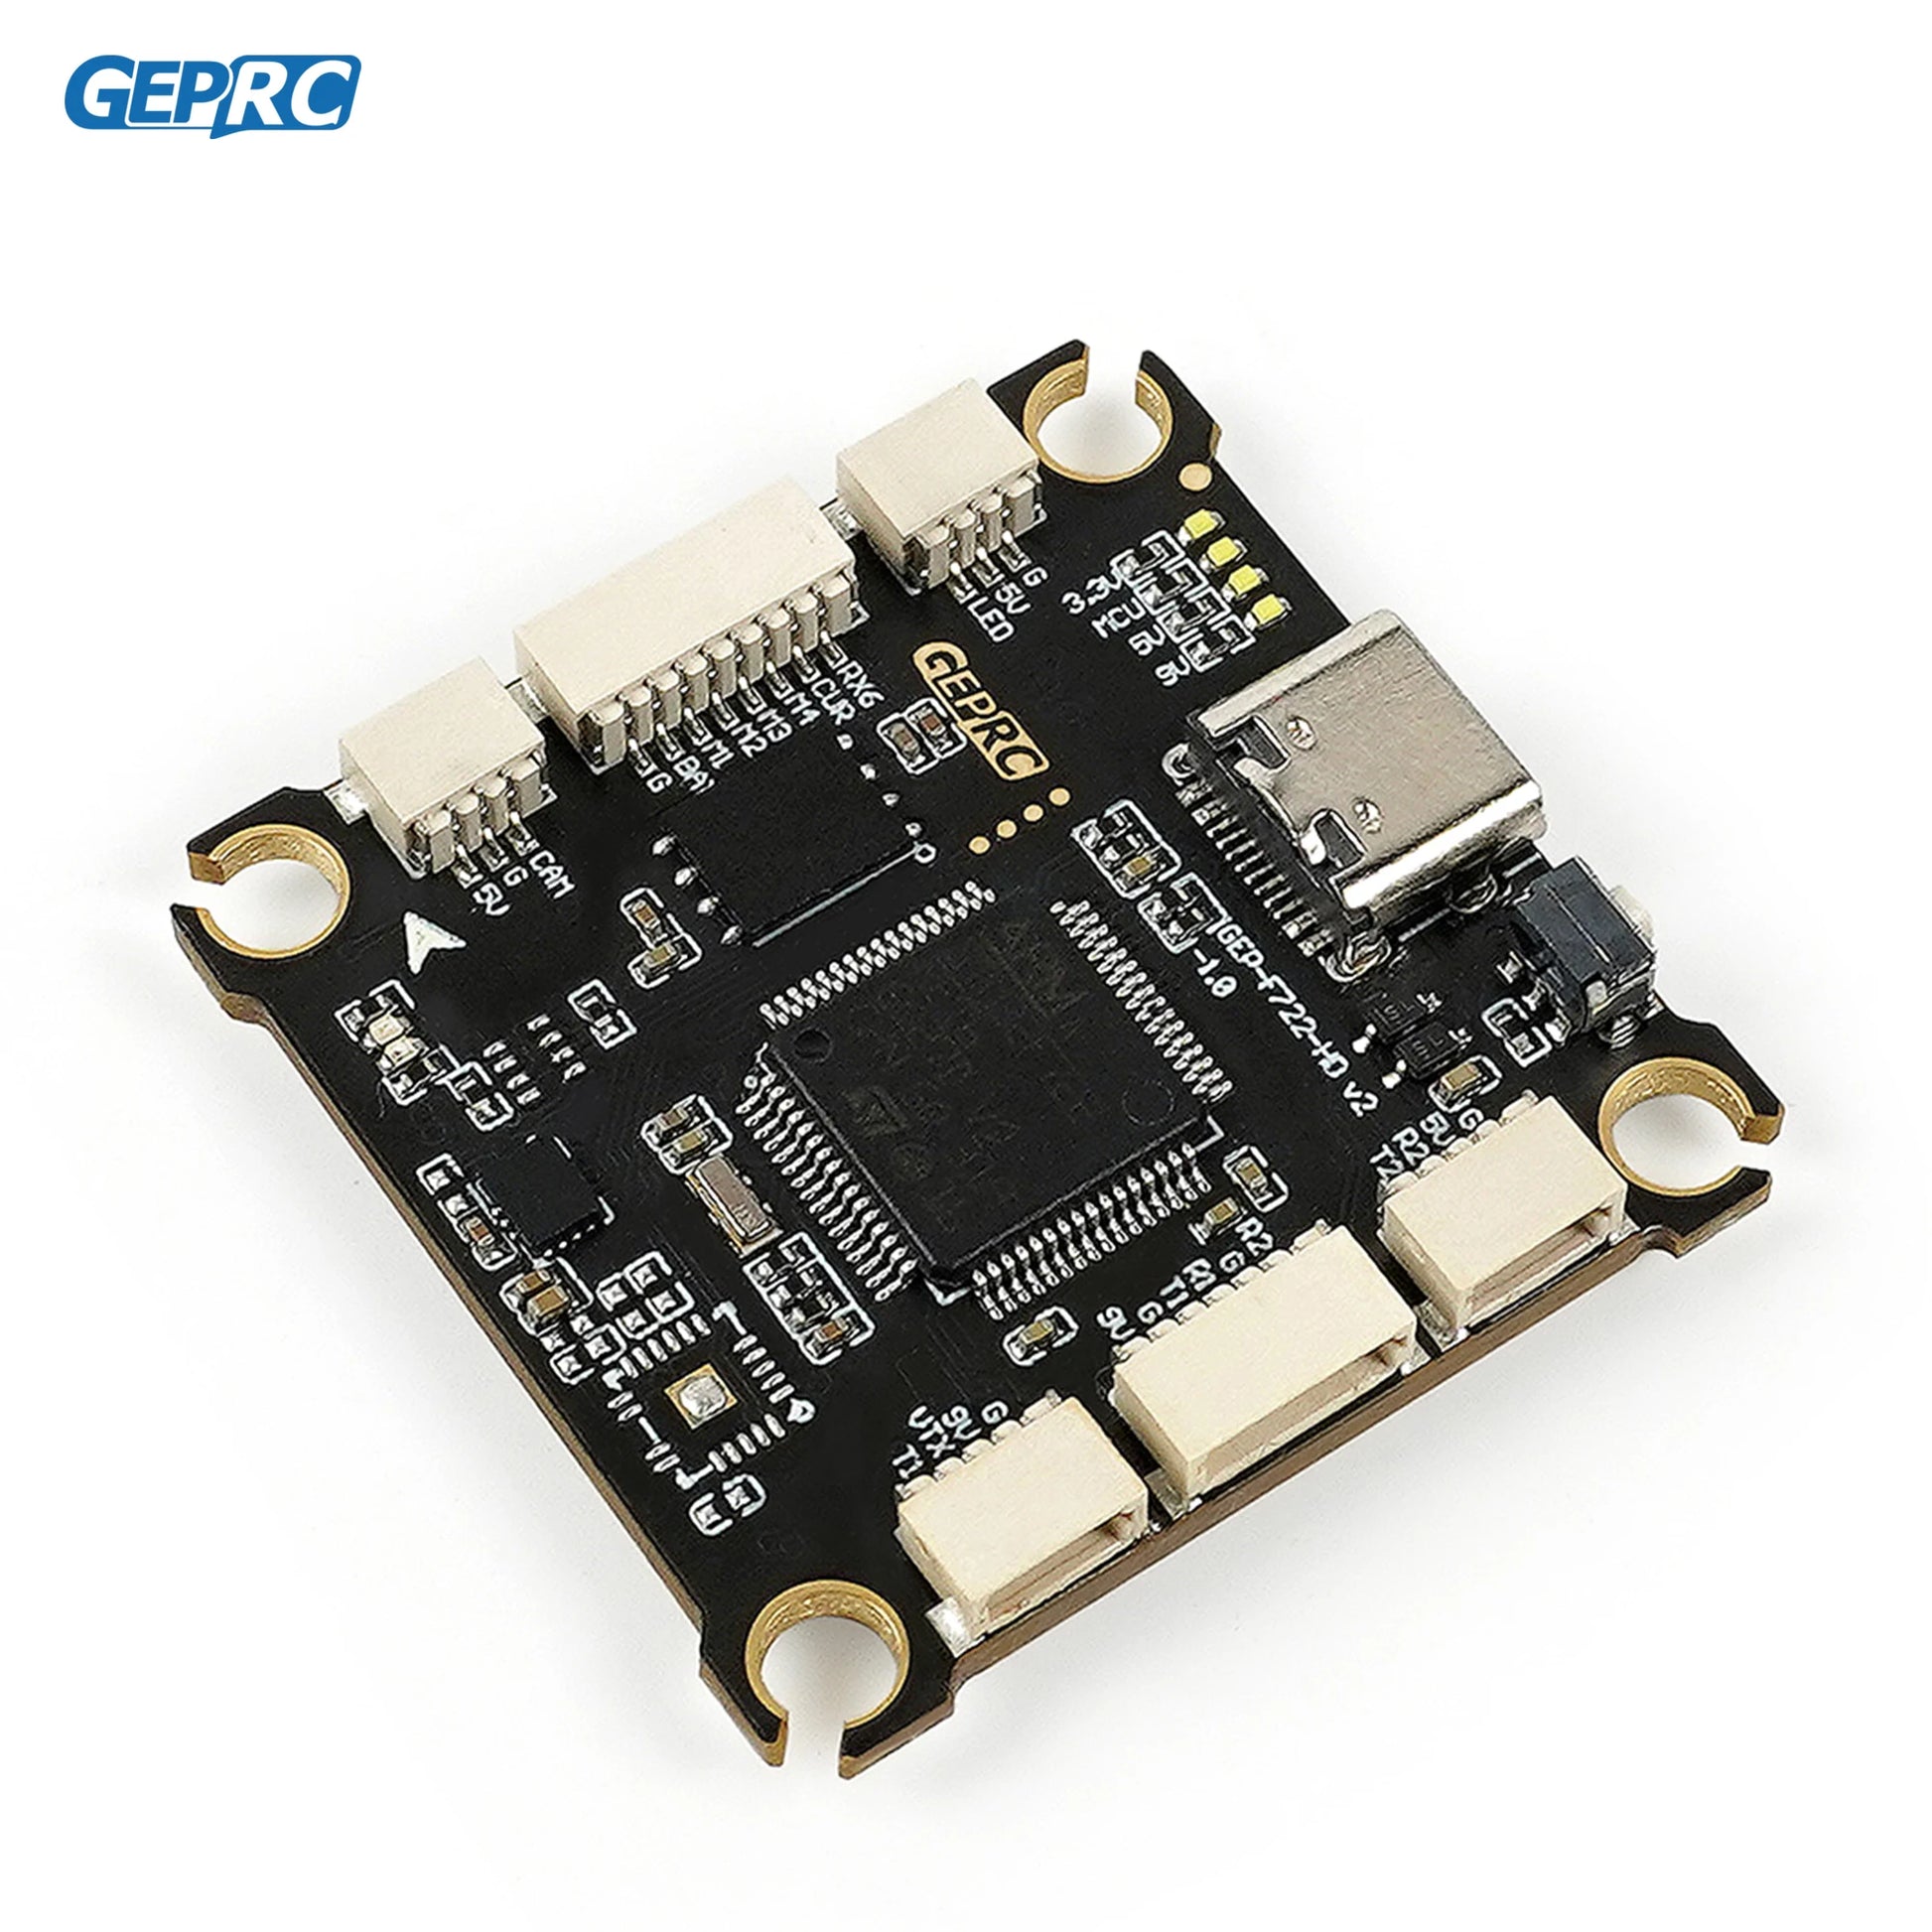 GEPRC GEP-F722-HD V2 Flight Controller 3-6S LiPo 16M Black Box ICM42688-P System RC FPV Racing Drone Quadcopter Accessories